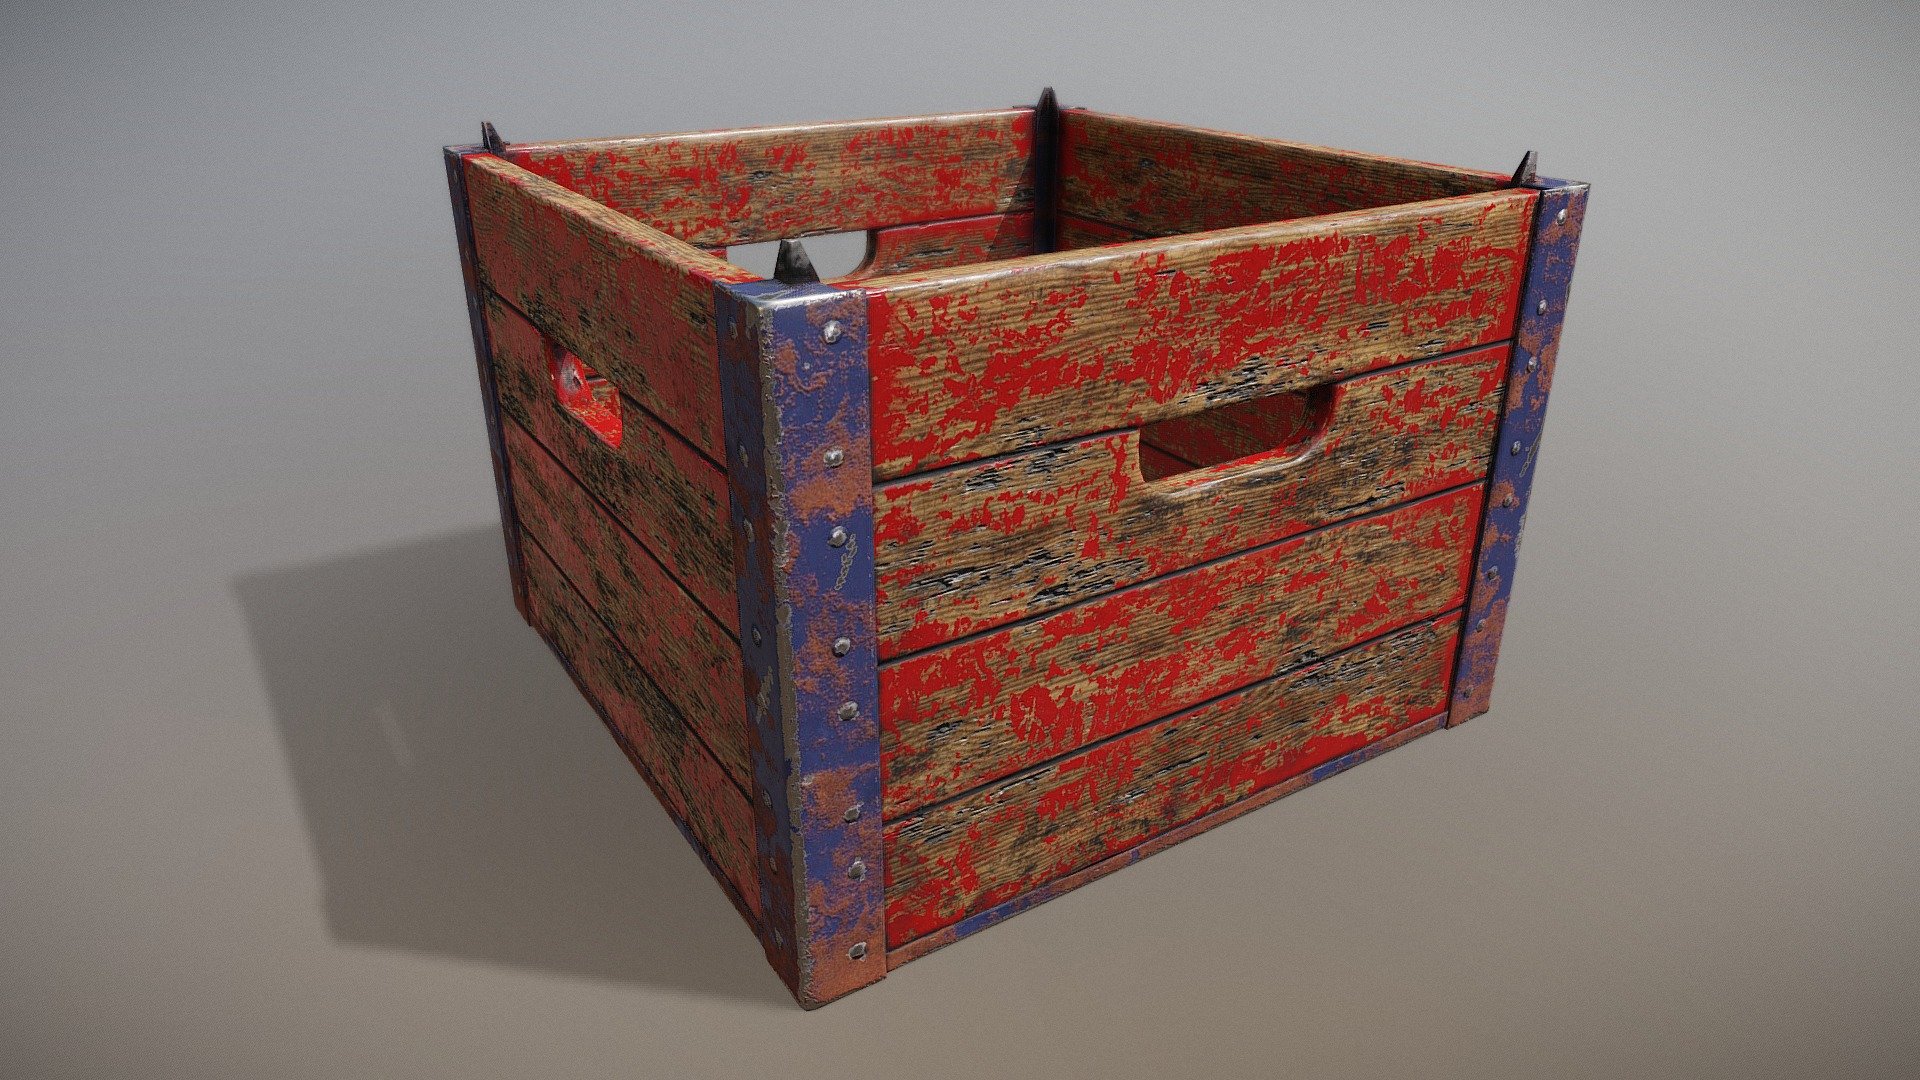 This is a nextgen Low Poly PBR model of a Wooden Crate.

I hope you will like it guys 3d model